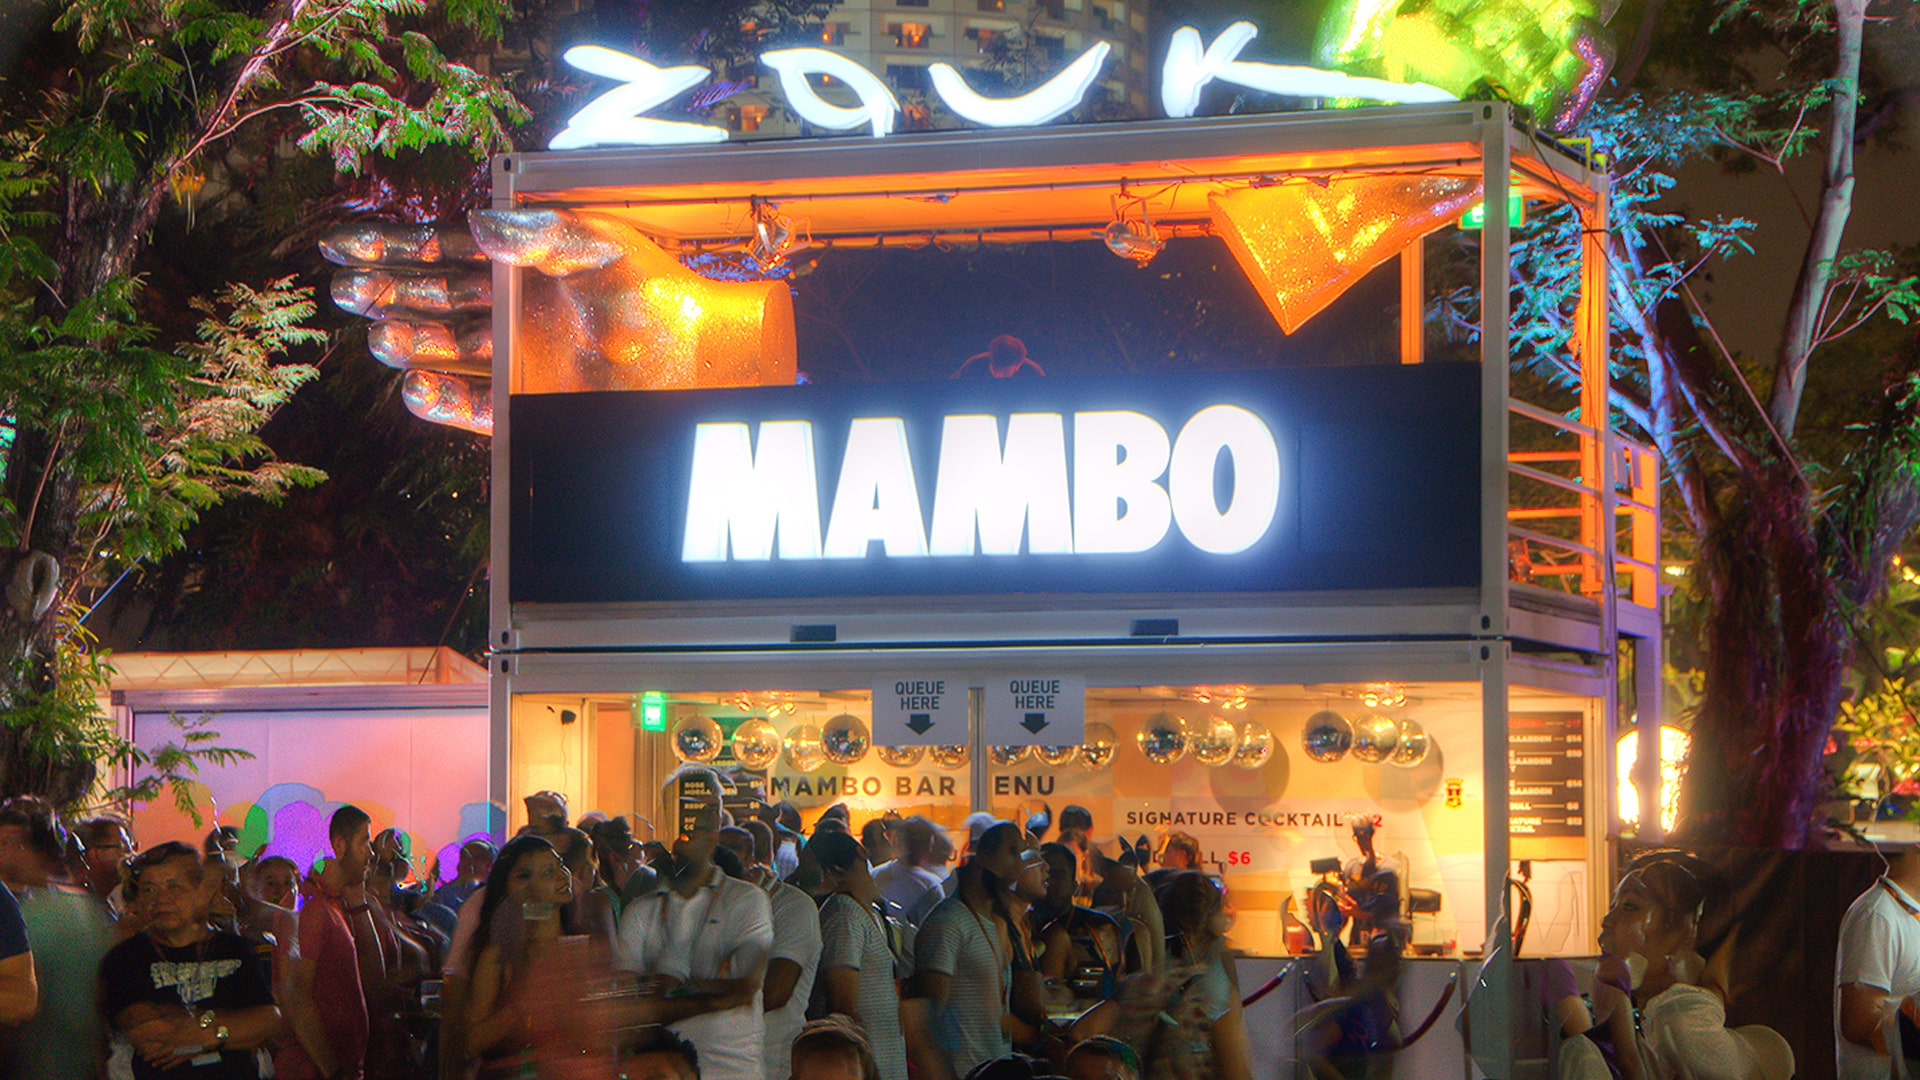 tsc_opt-images_customized-containers_mambo-bar_1920x1080-02-min